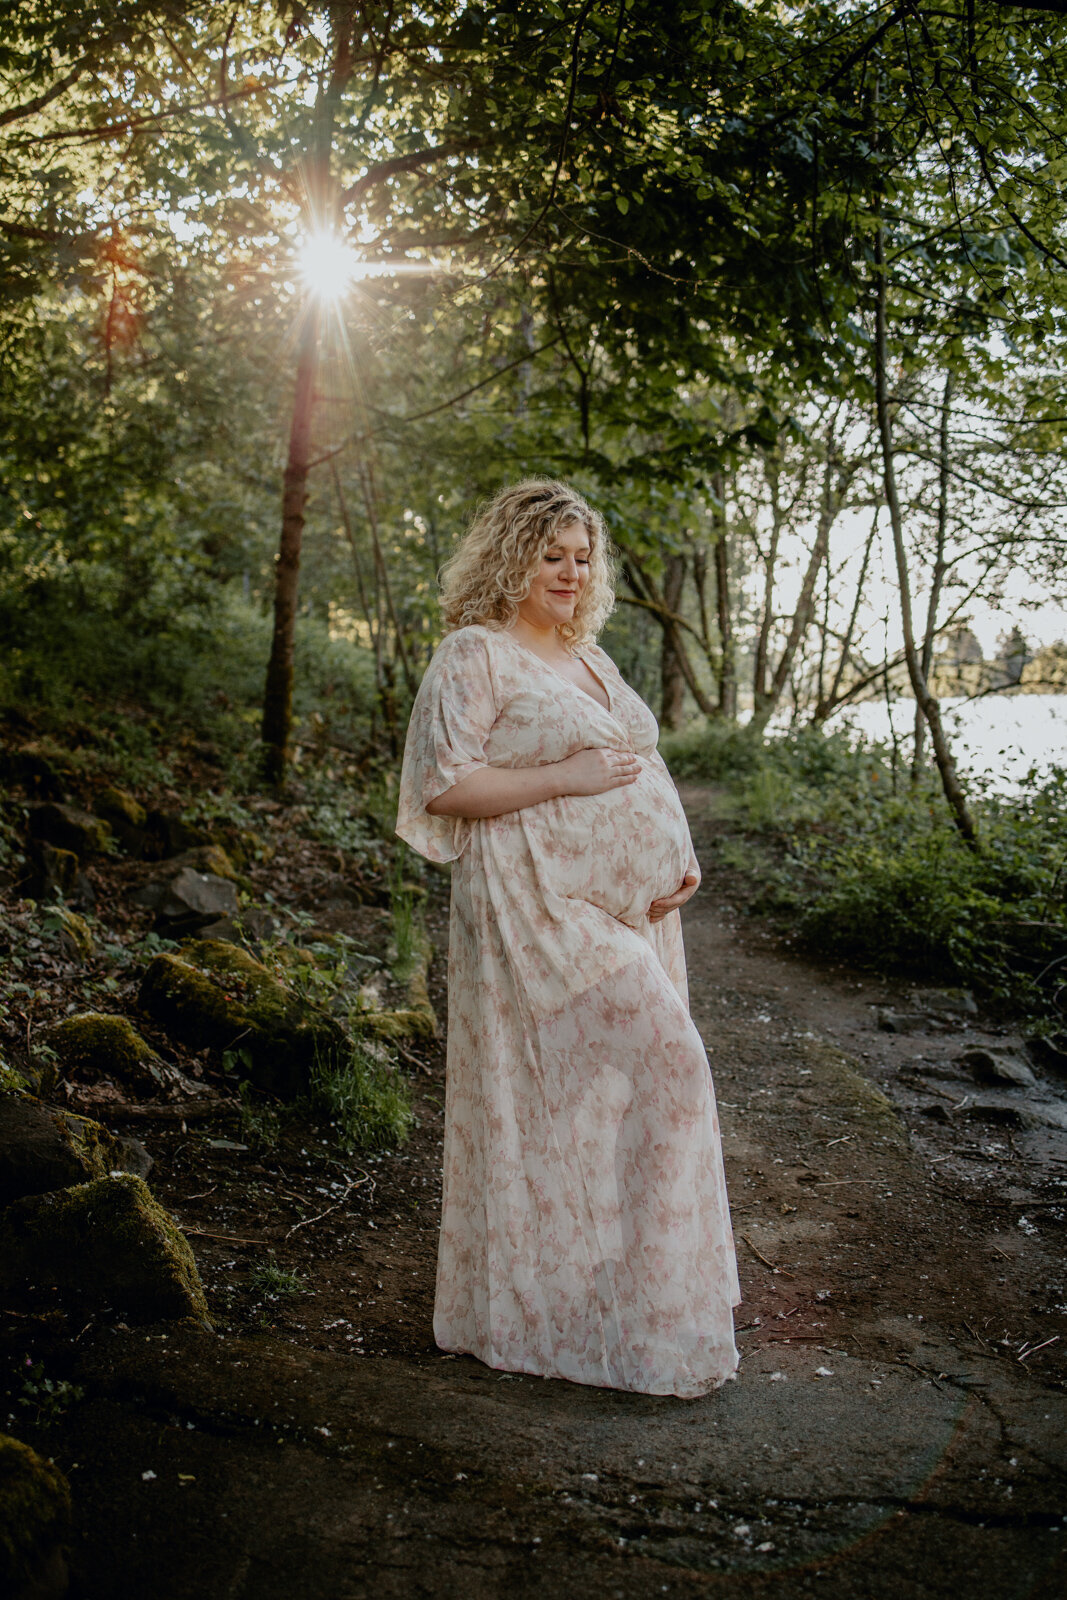 Eugene maternity photographer offering local and adventure packages